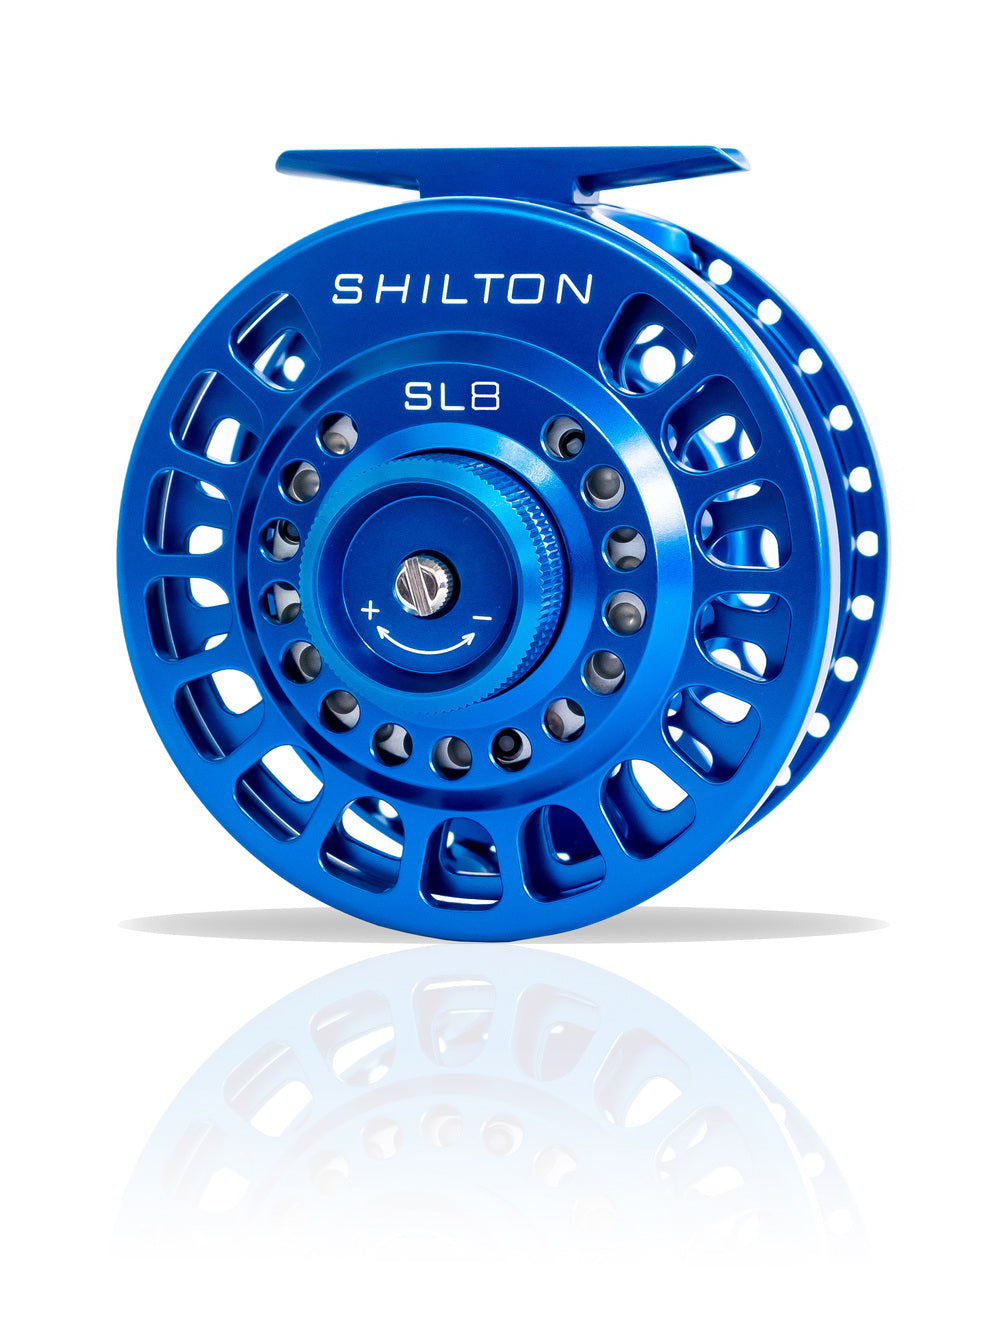 Shilton SL Fly Reel Review (Hands-On & Tested) - Into Fly Fishing